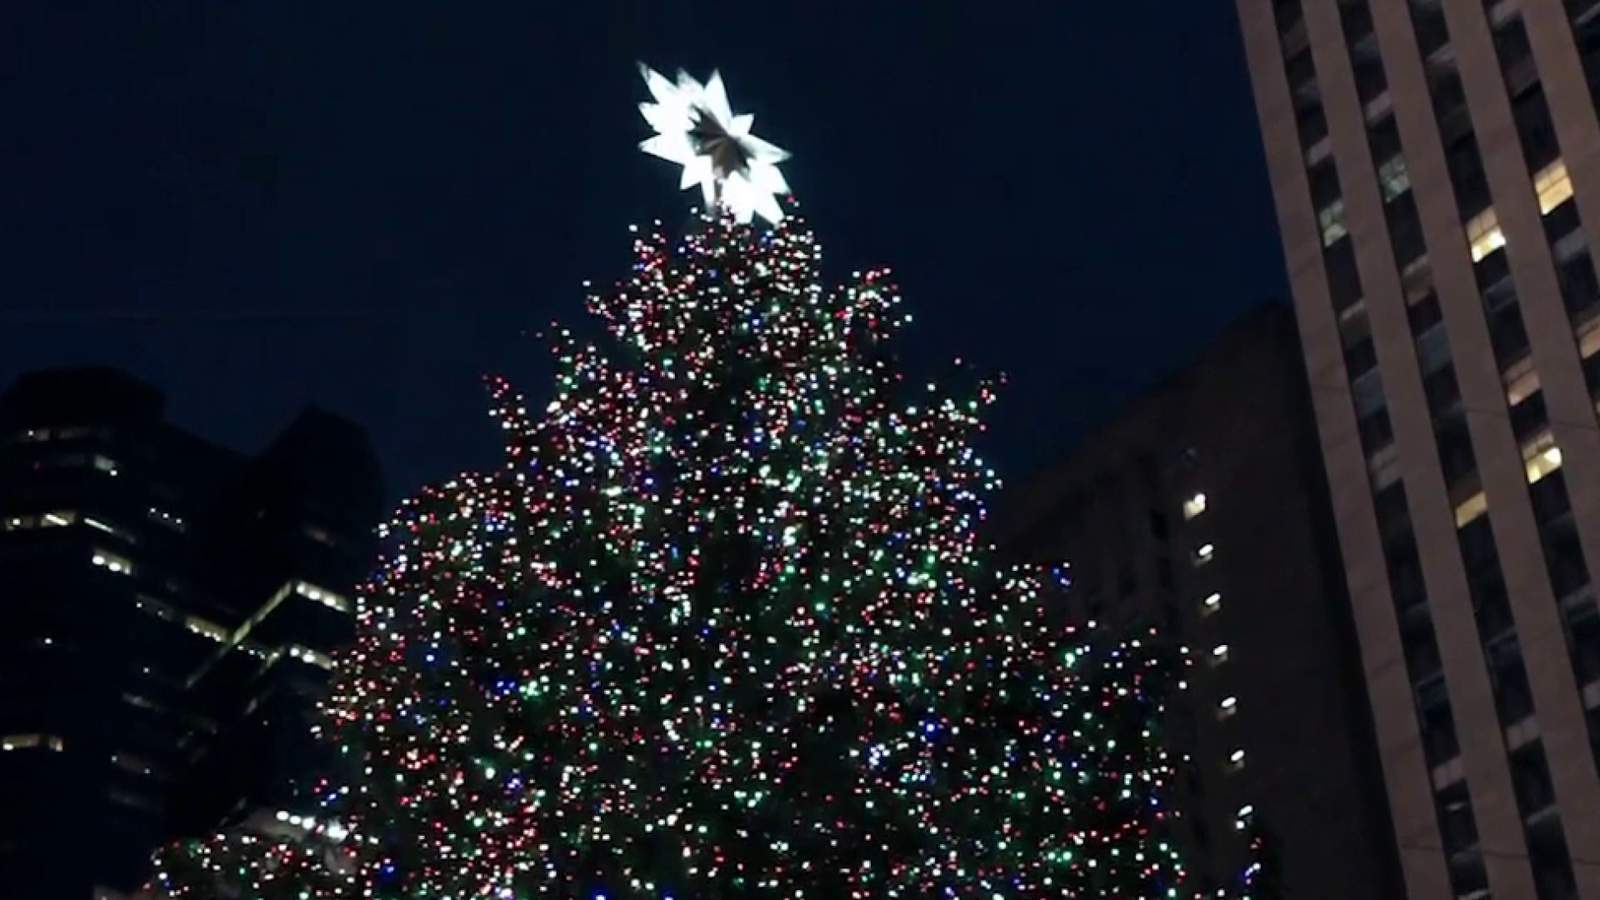 The history of the Christmas tree, and why it became a popular holiday tradition